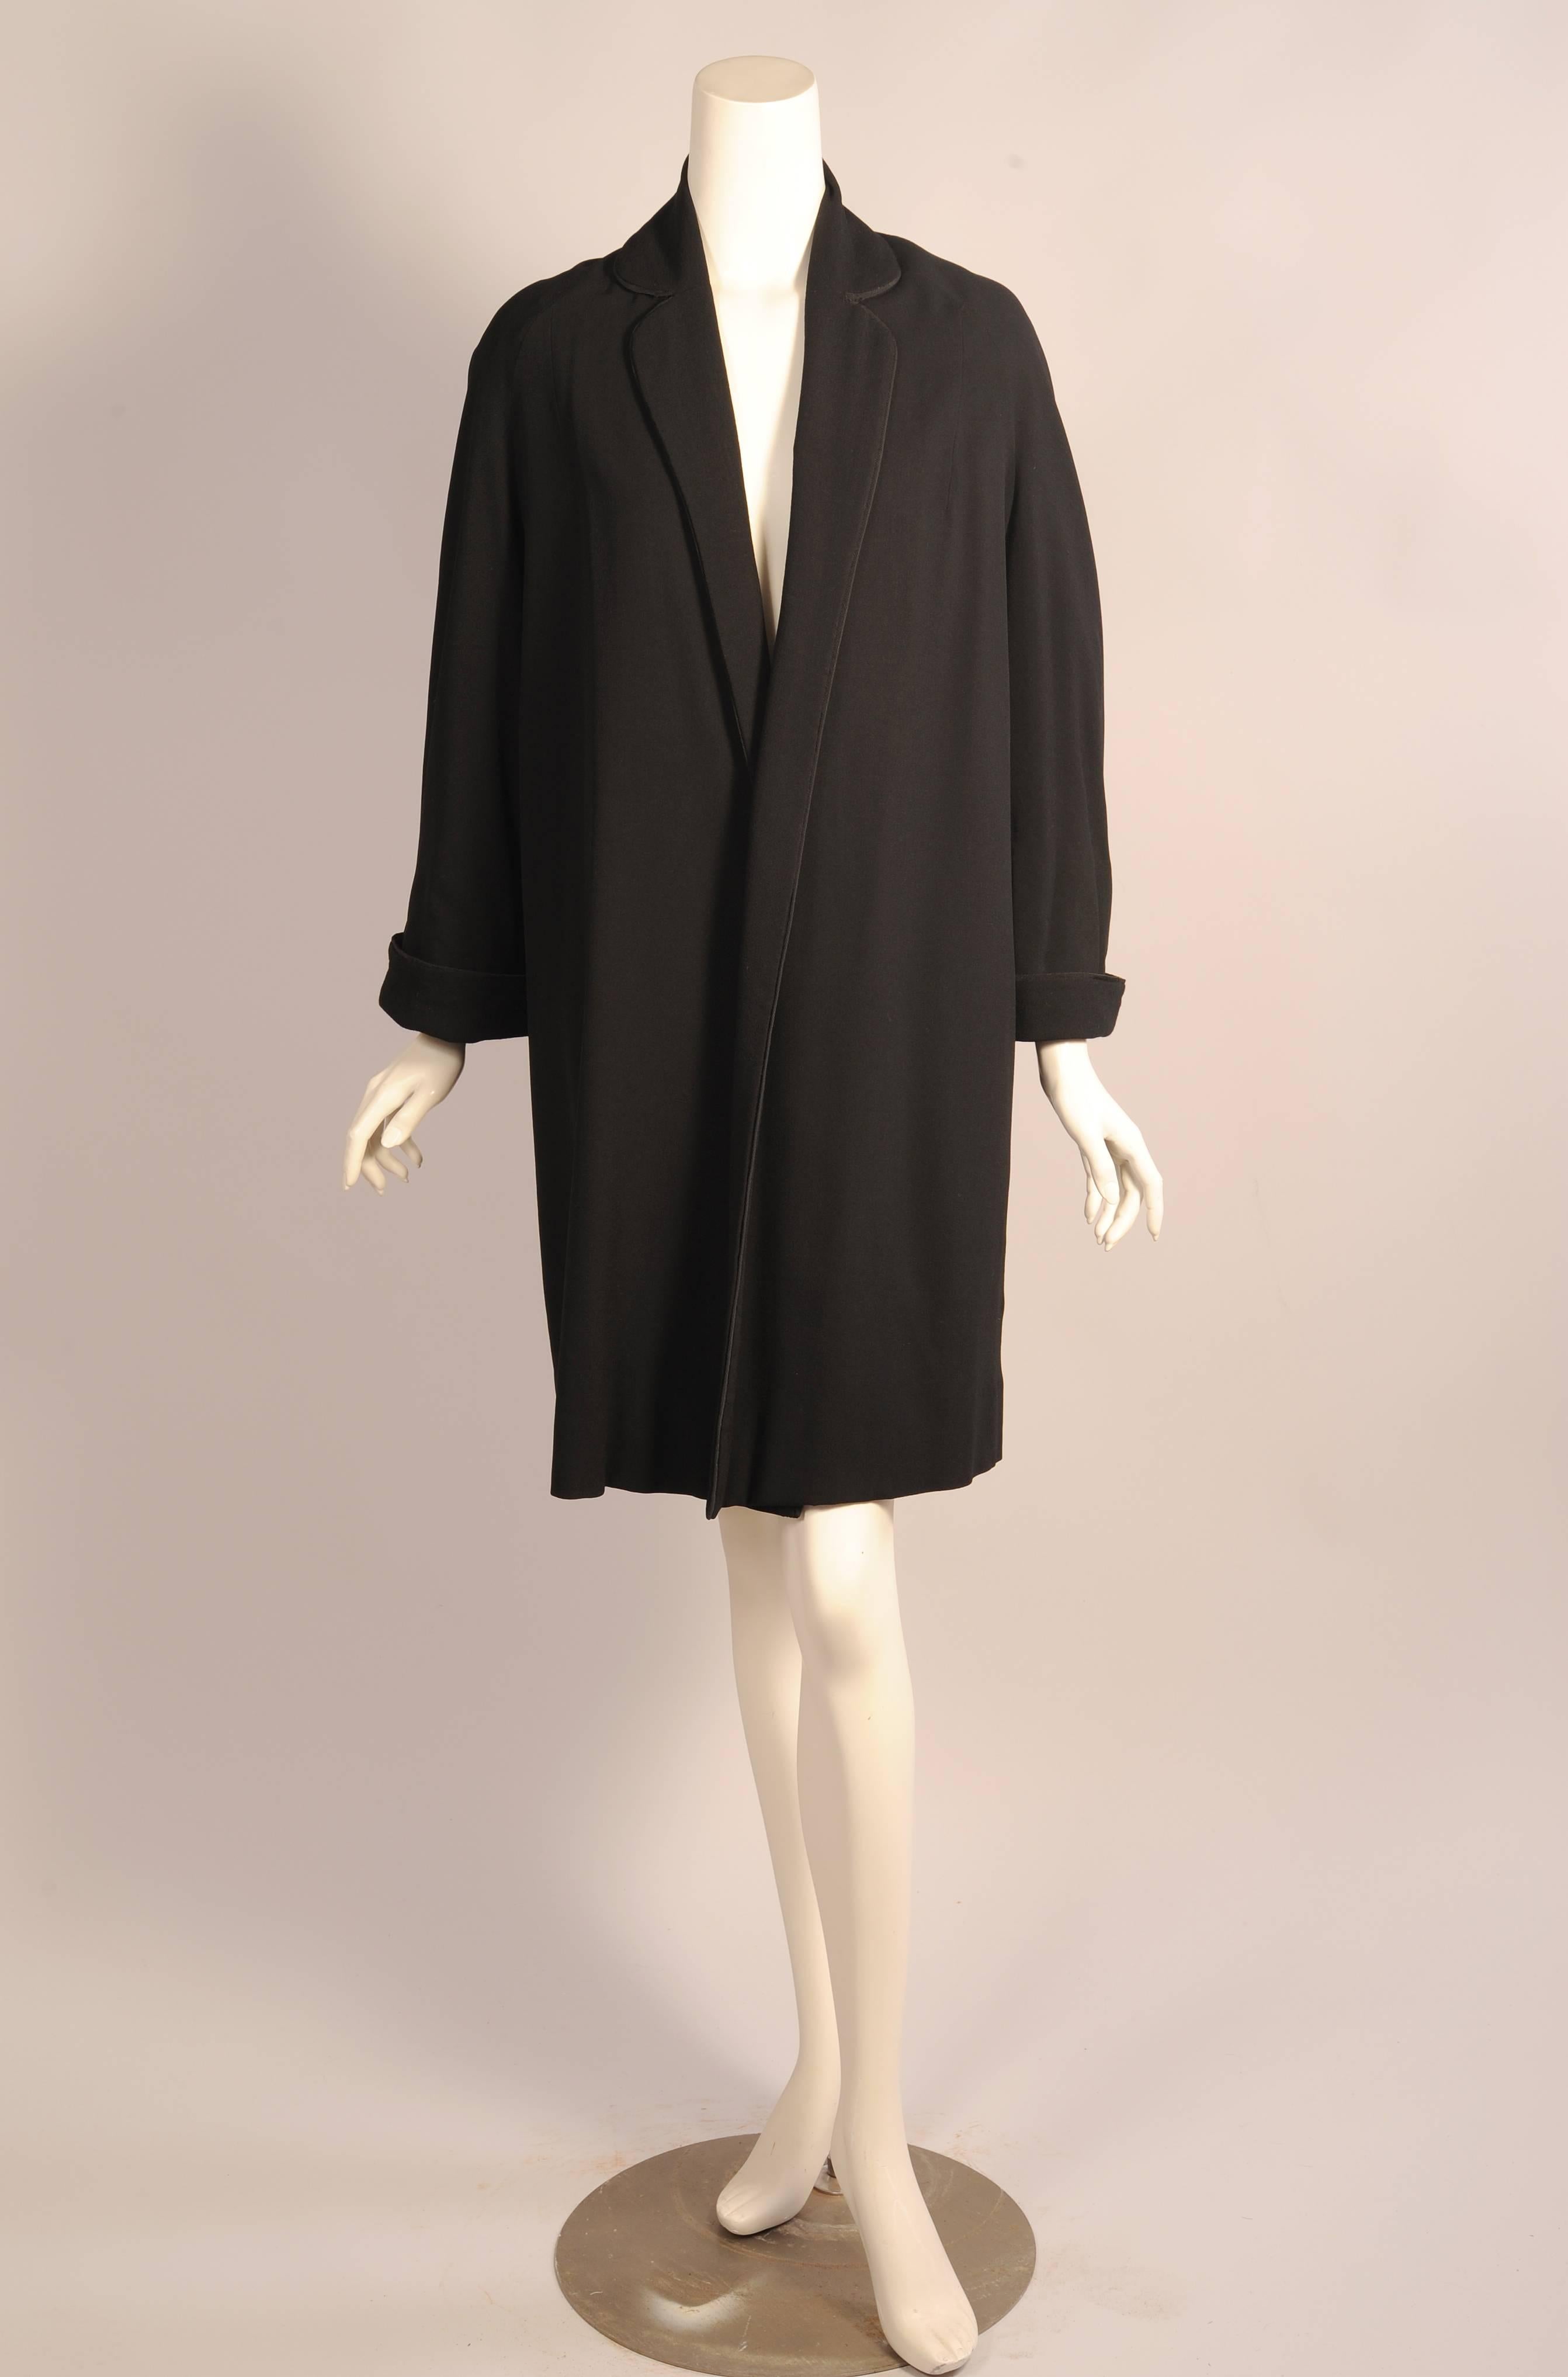 Light weight weight black wool is used for this duster or swing style coat from Pierre Balmain Haute Couture. The notched collar goes all the way to the hemline on this coat which has no closures. The collar and cuffs are edged with black soutache